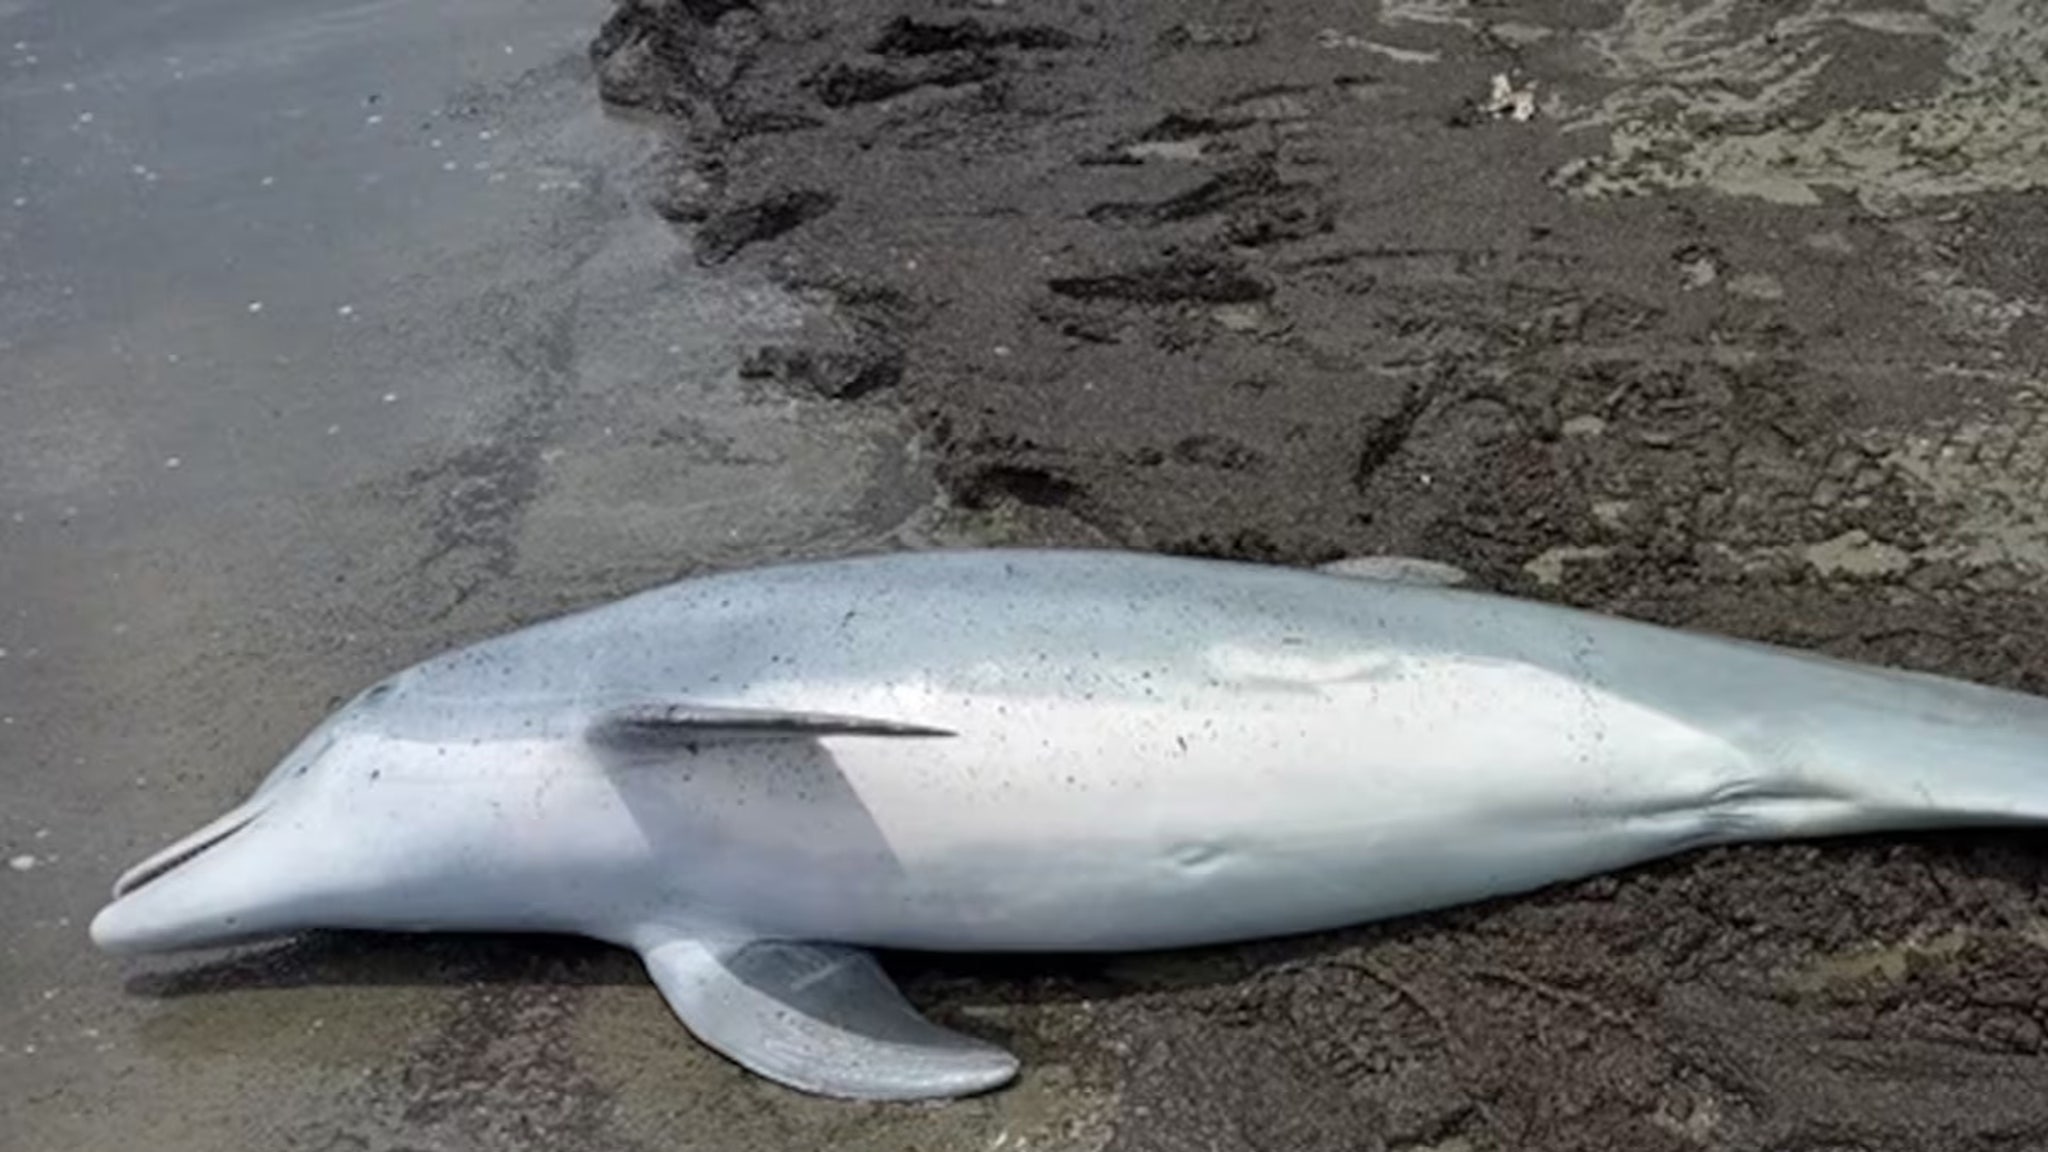 Dolphin That Washed Ashore in Louisiana Was Shot & Killed, Officials Say